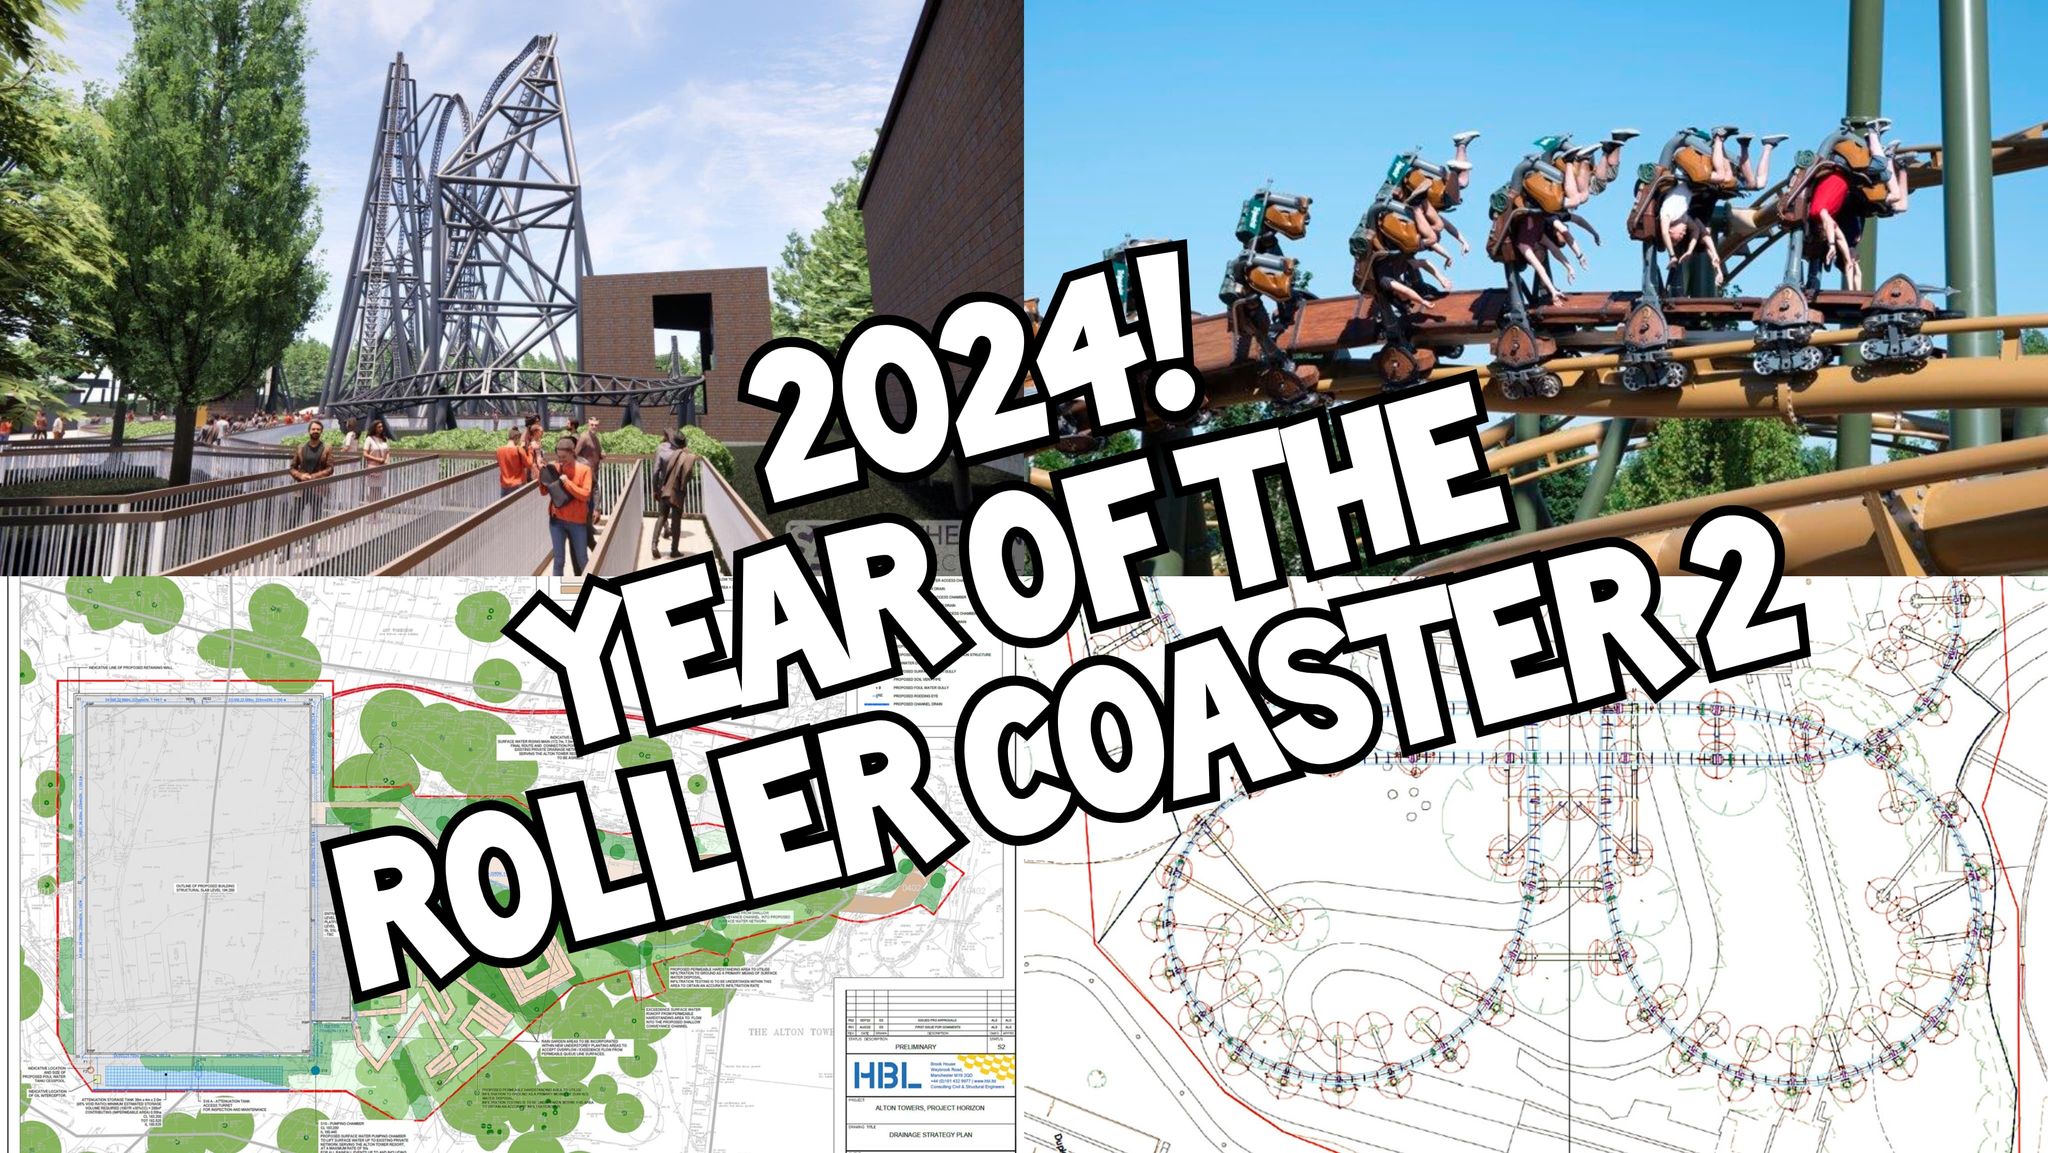 2024 - Year Of The Roller Coaster 2?! - Theme Park Insanity